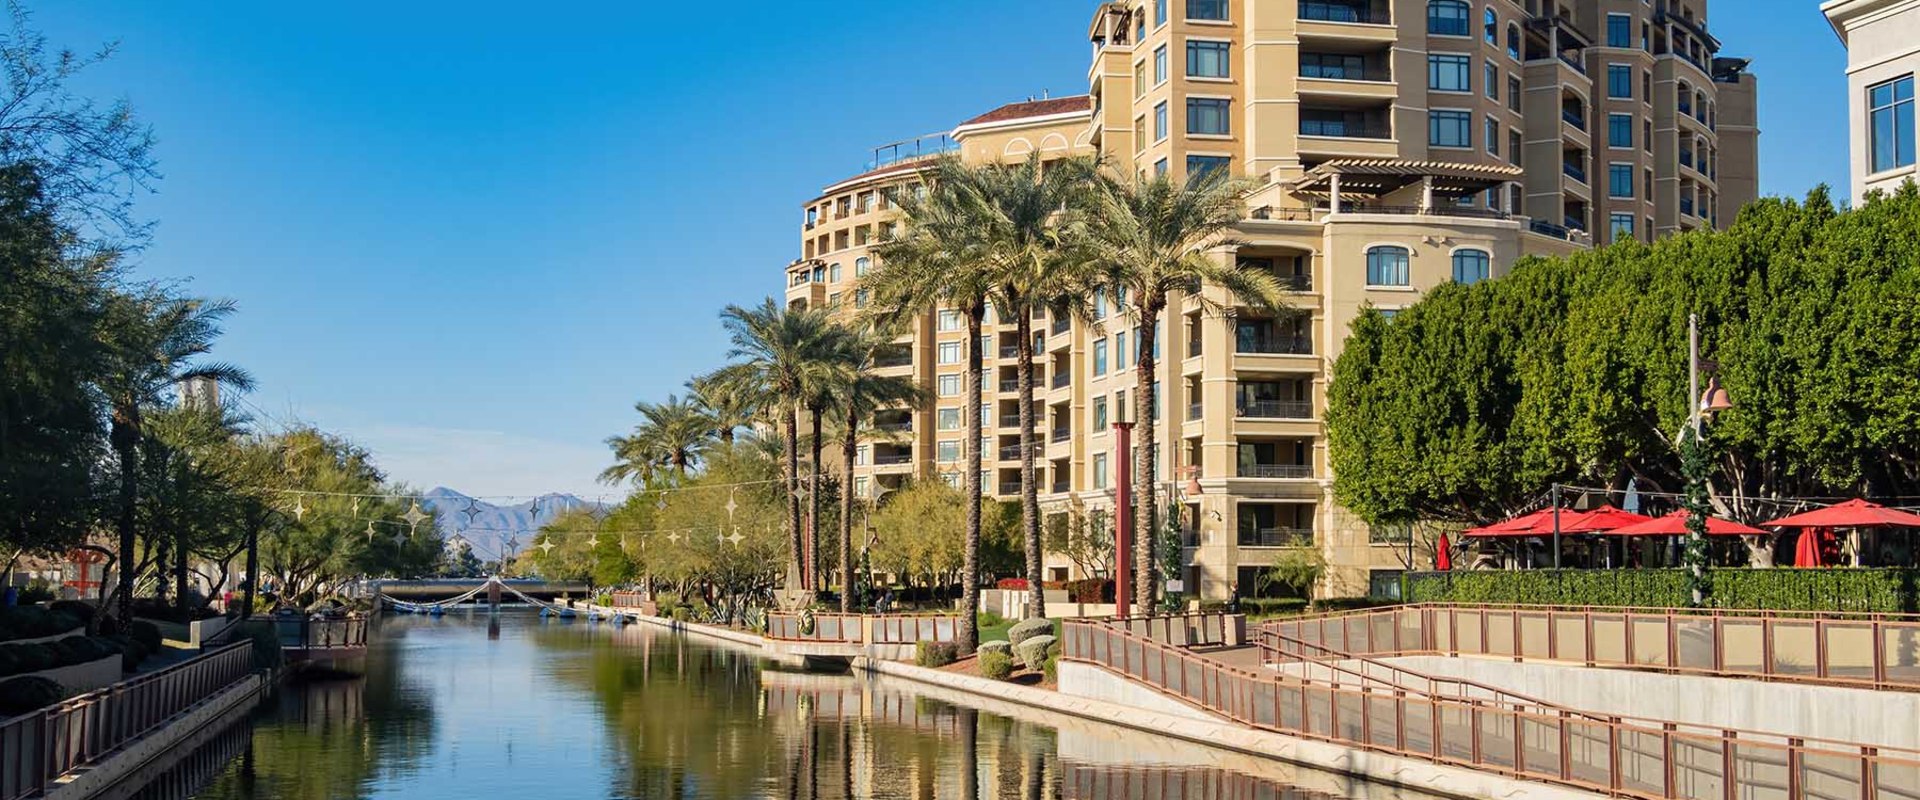 Is Living in Scottsdale Worth It?